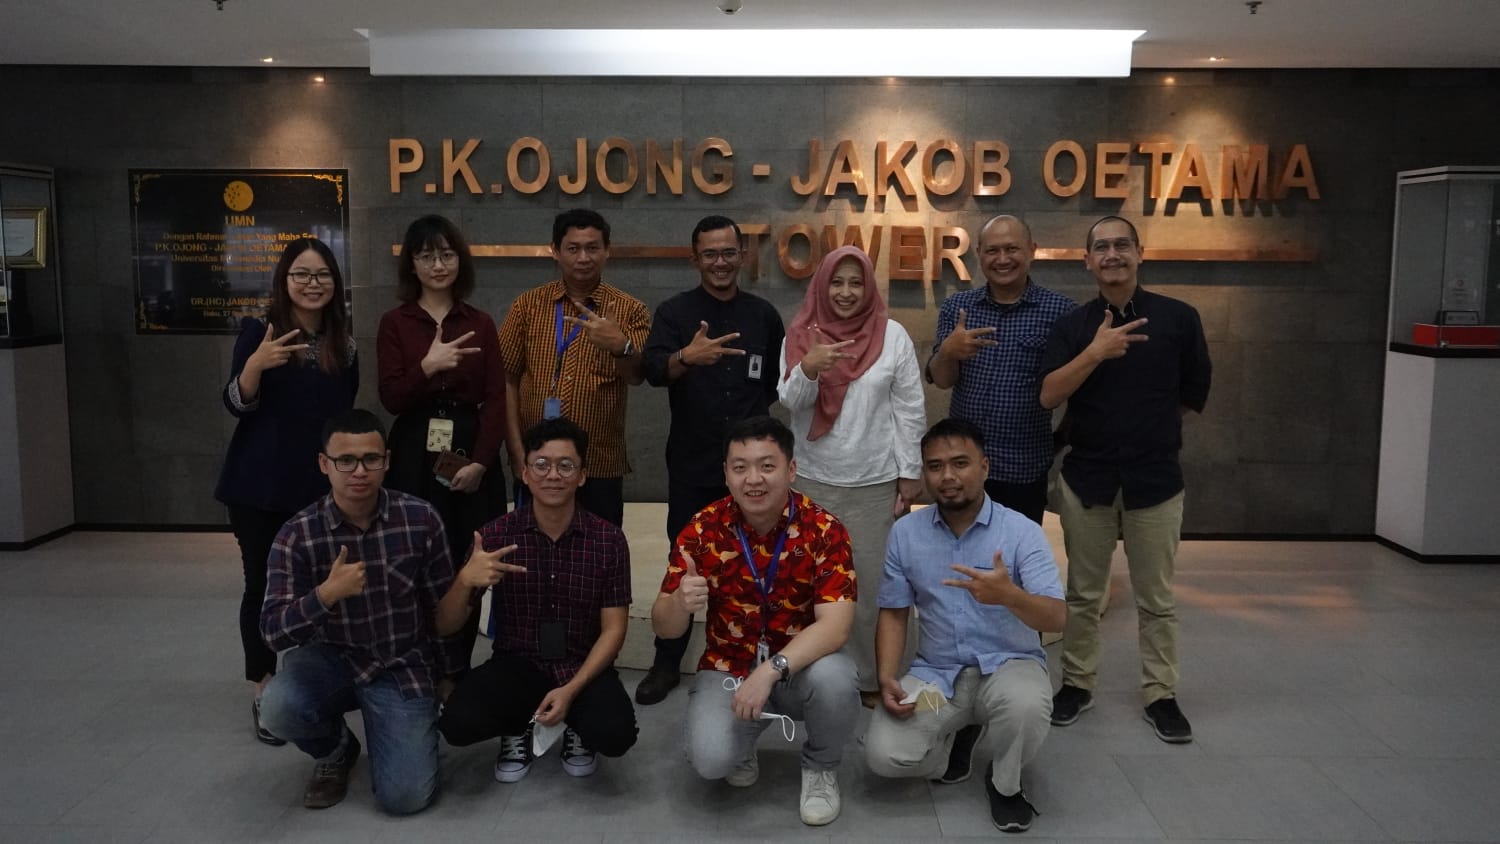 The Faculty of Art and Design of UMN Collaborates with the Faculty of Creative Industries of Telkom University